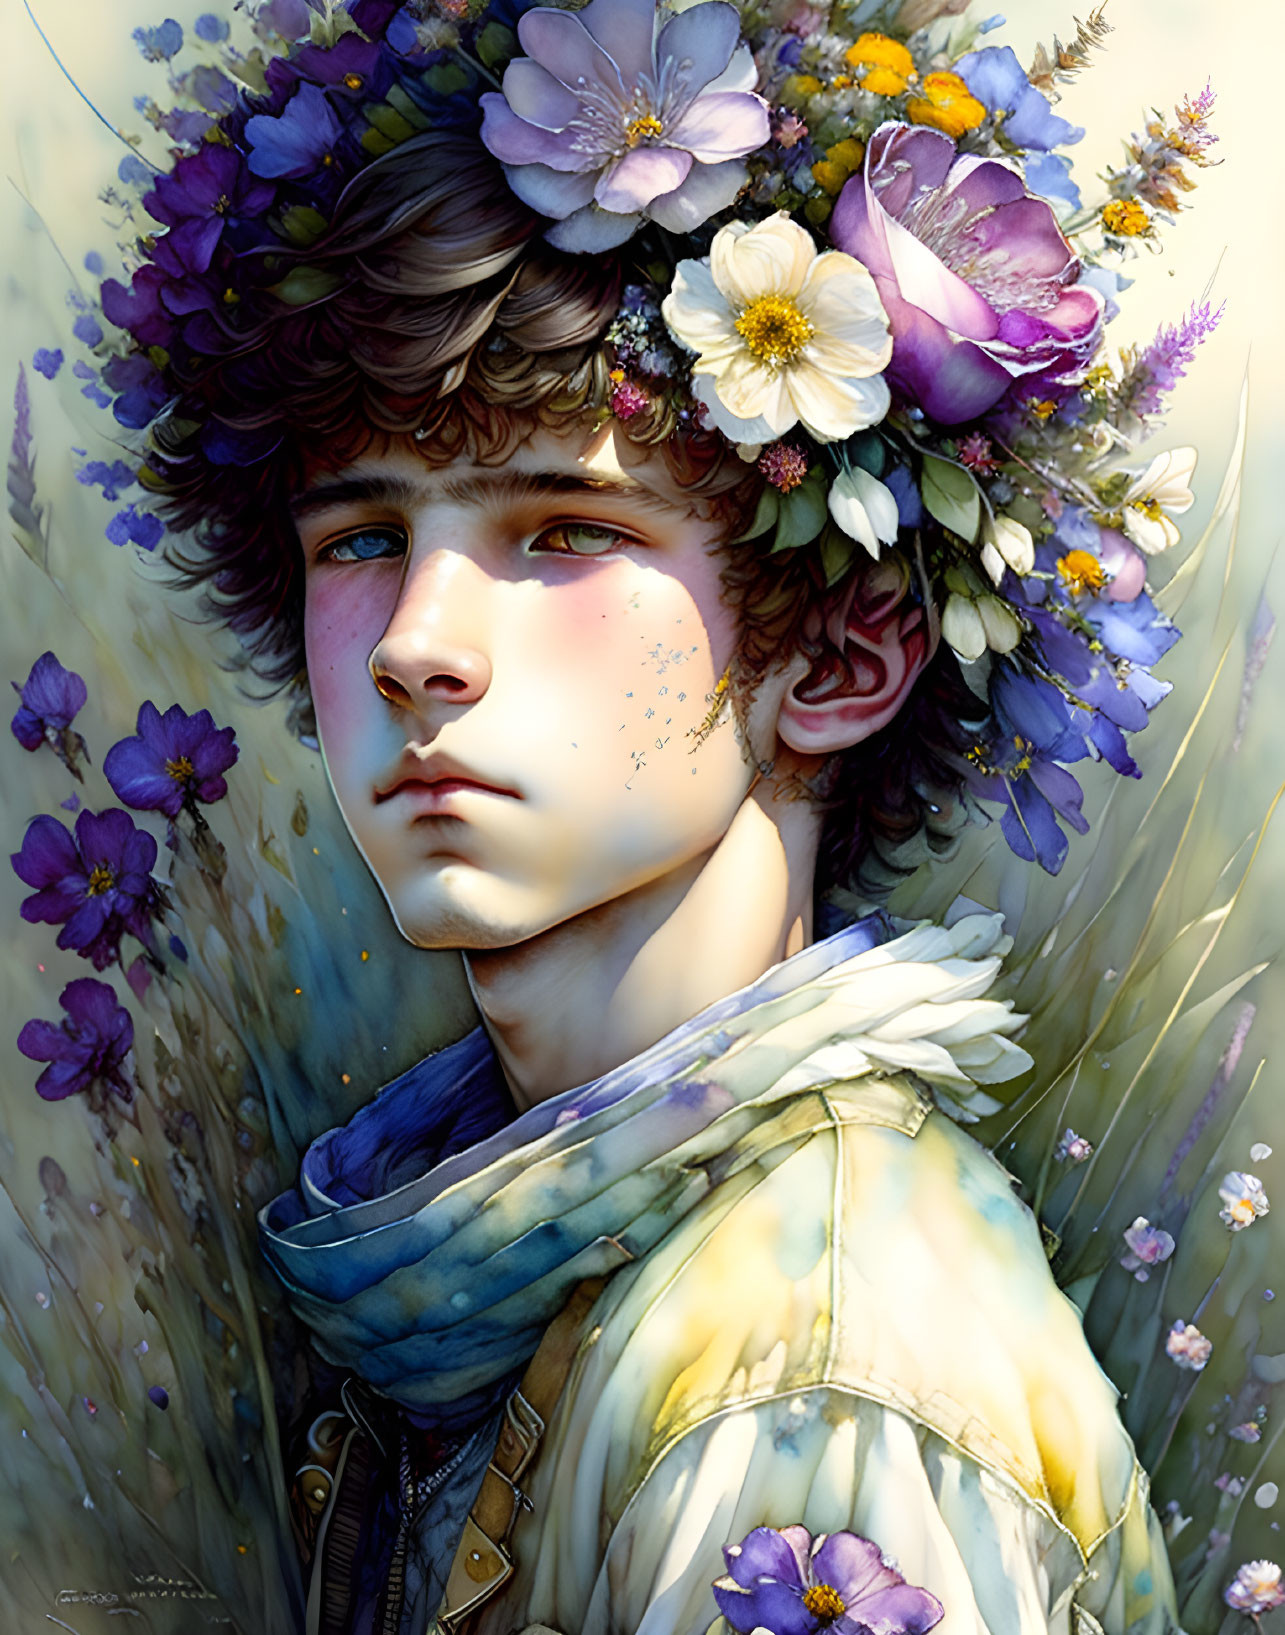 Digital illustration of person with thoughtful gaze wearing crown of purple and white flowers against nature backdrop